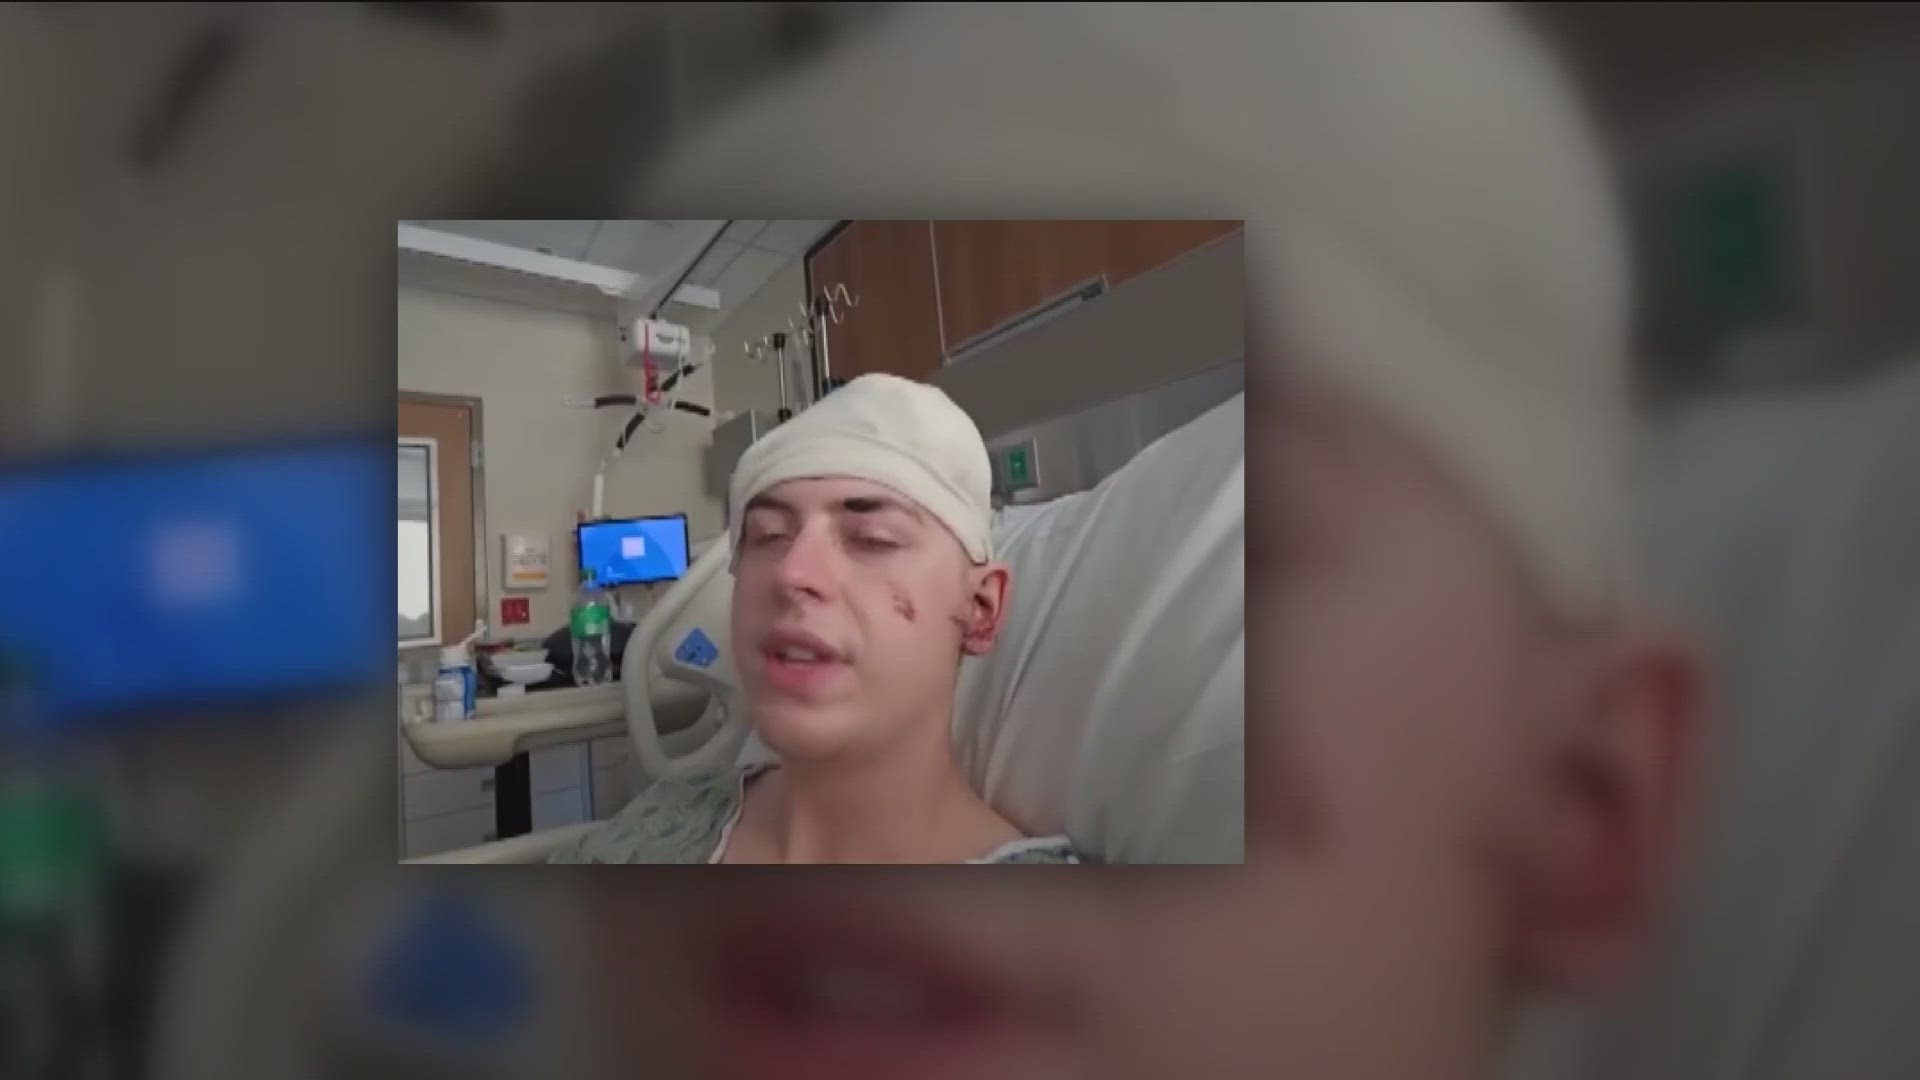 Seth Gott, 19, was attacked by a stranger with a machete on Tuesday near Auditorium Shores in Downtown Austin.